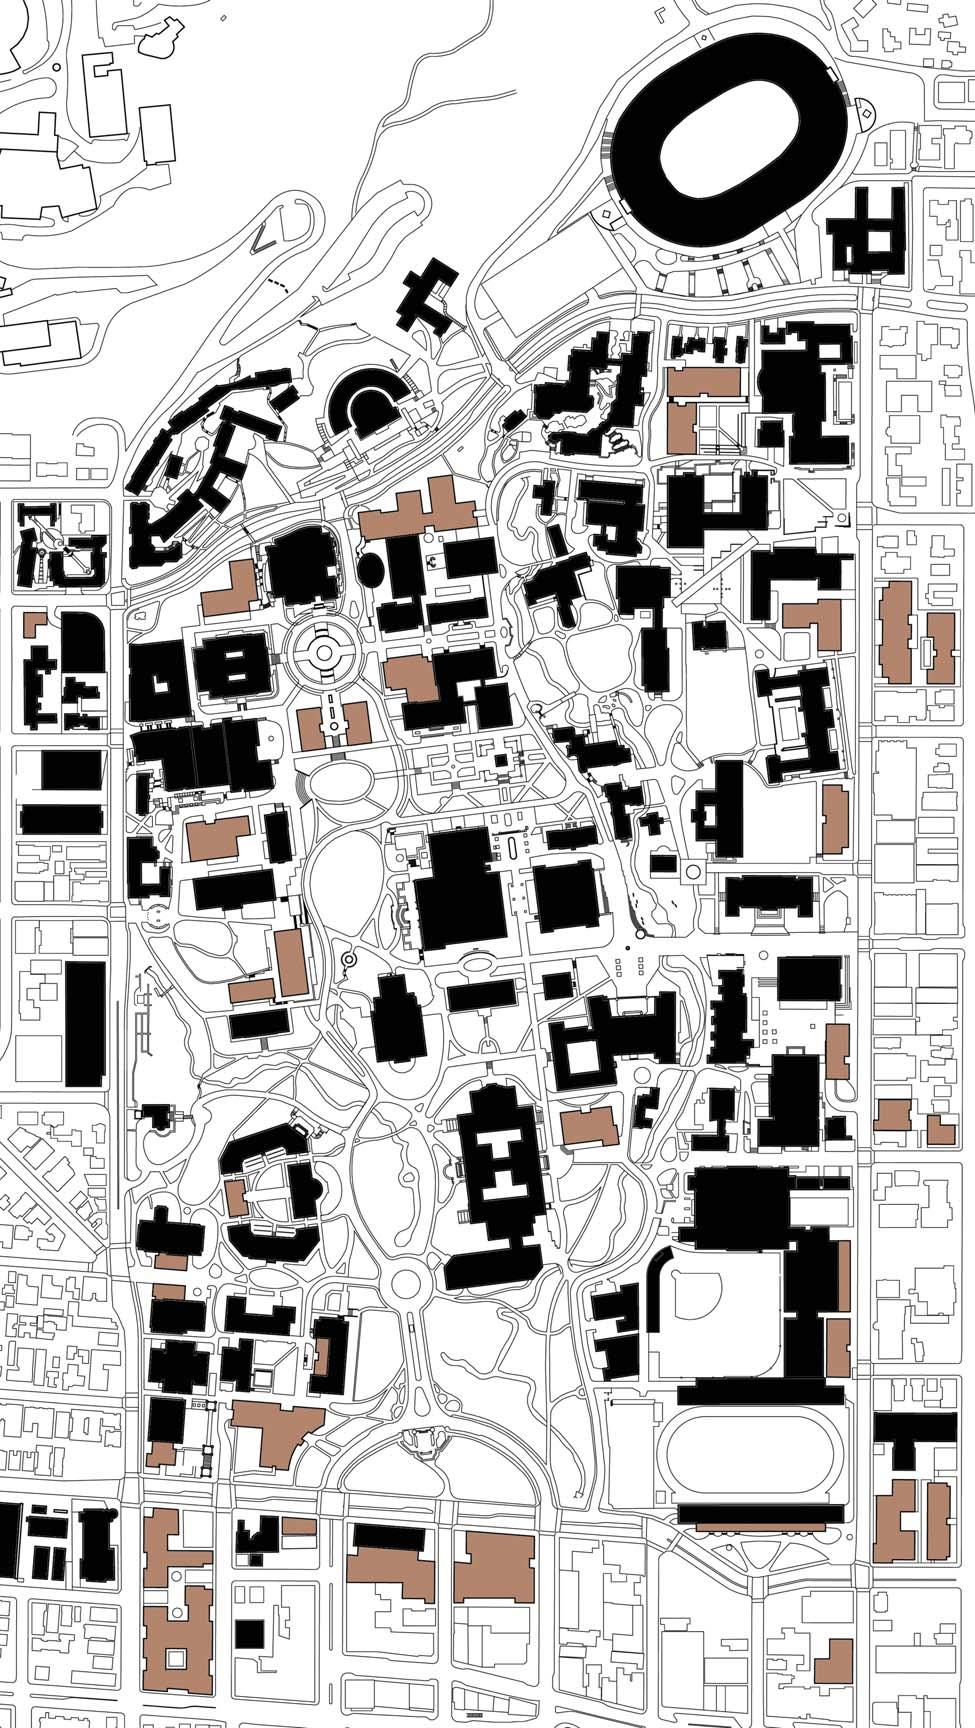 2020 LONG RANGE DEVELOPMENT PLAN U C BERKELEY FIGURE 3B ILLUSTRATIVE CONCEPT Existing/Approved Campus Buildings Potential Projects The projects shown in this figure represent one way in which the